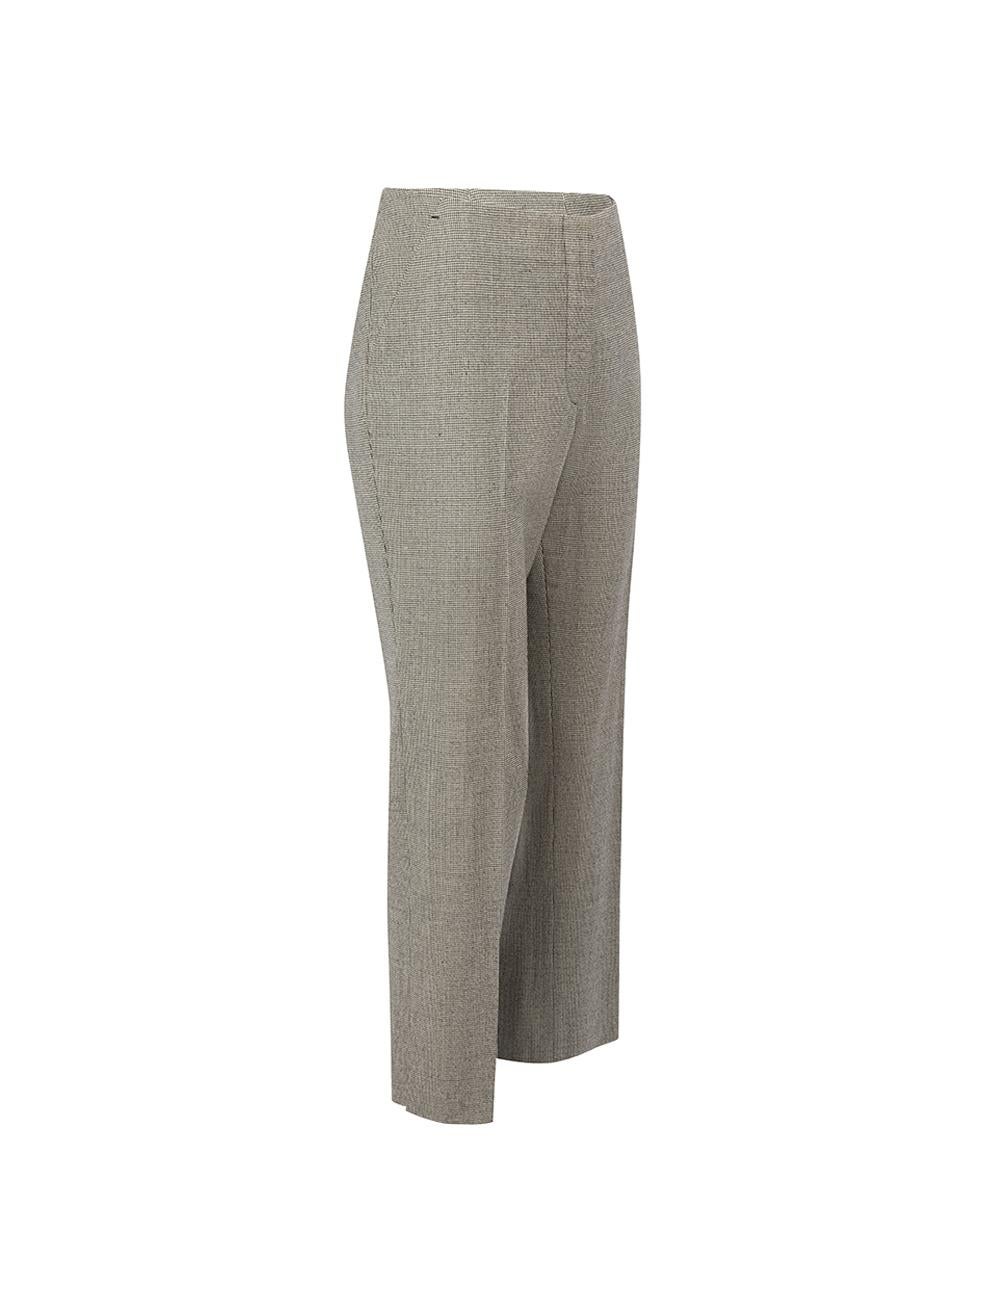 CONDITION is Very good. Minimal wear to trousers is evident. Minimal wear to the front of the trousers with small brown marks on this used Prada designer resale item.



Details


Grey

Wool

Trousers

Houndstooth pattern

Straight fit

Mid